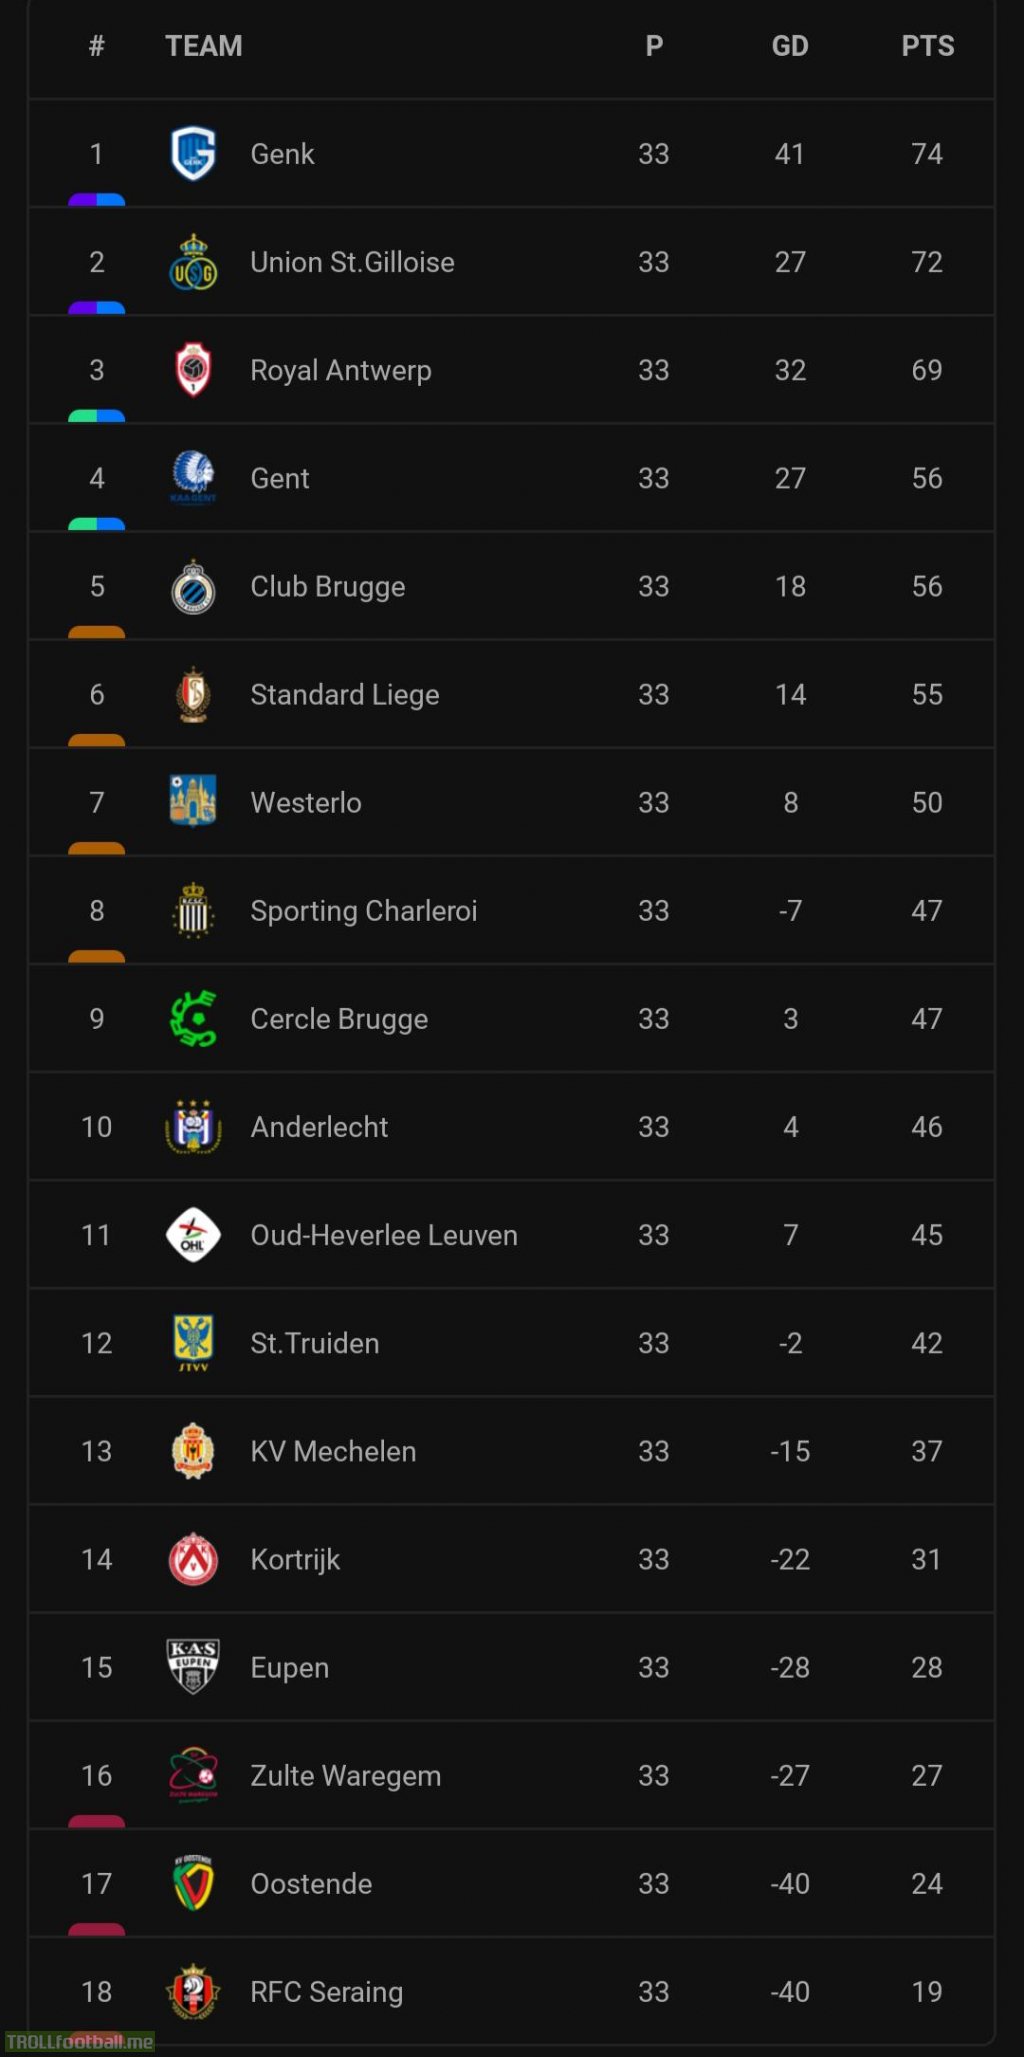 Belgian Pro League standings after GW 33, 1 game to go in regular competition